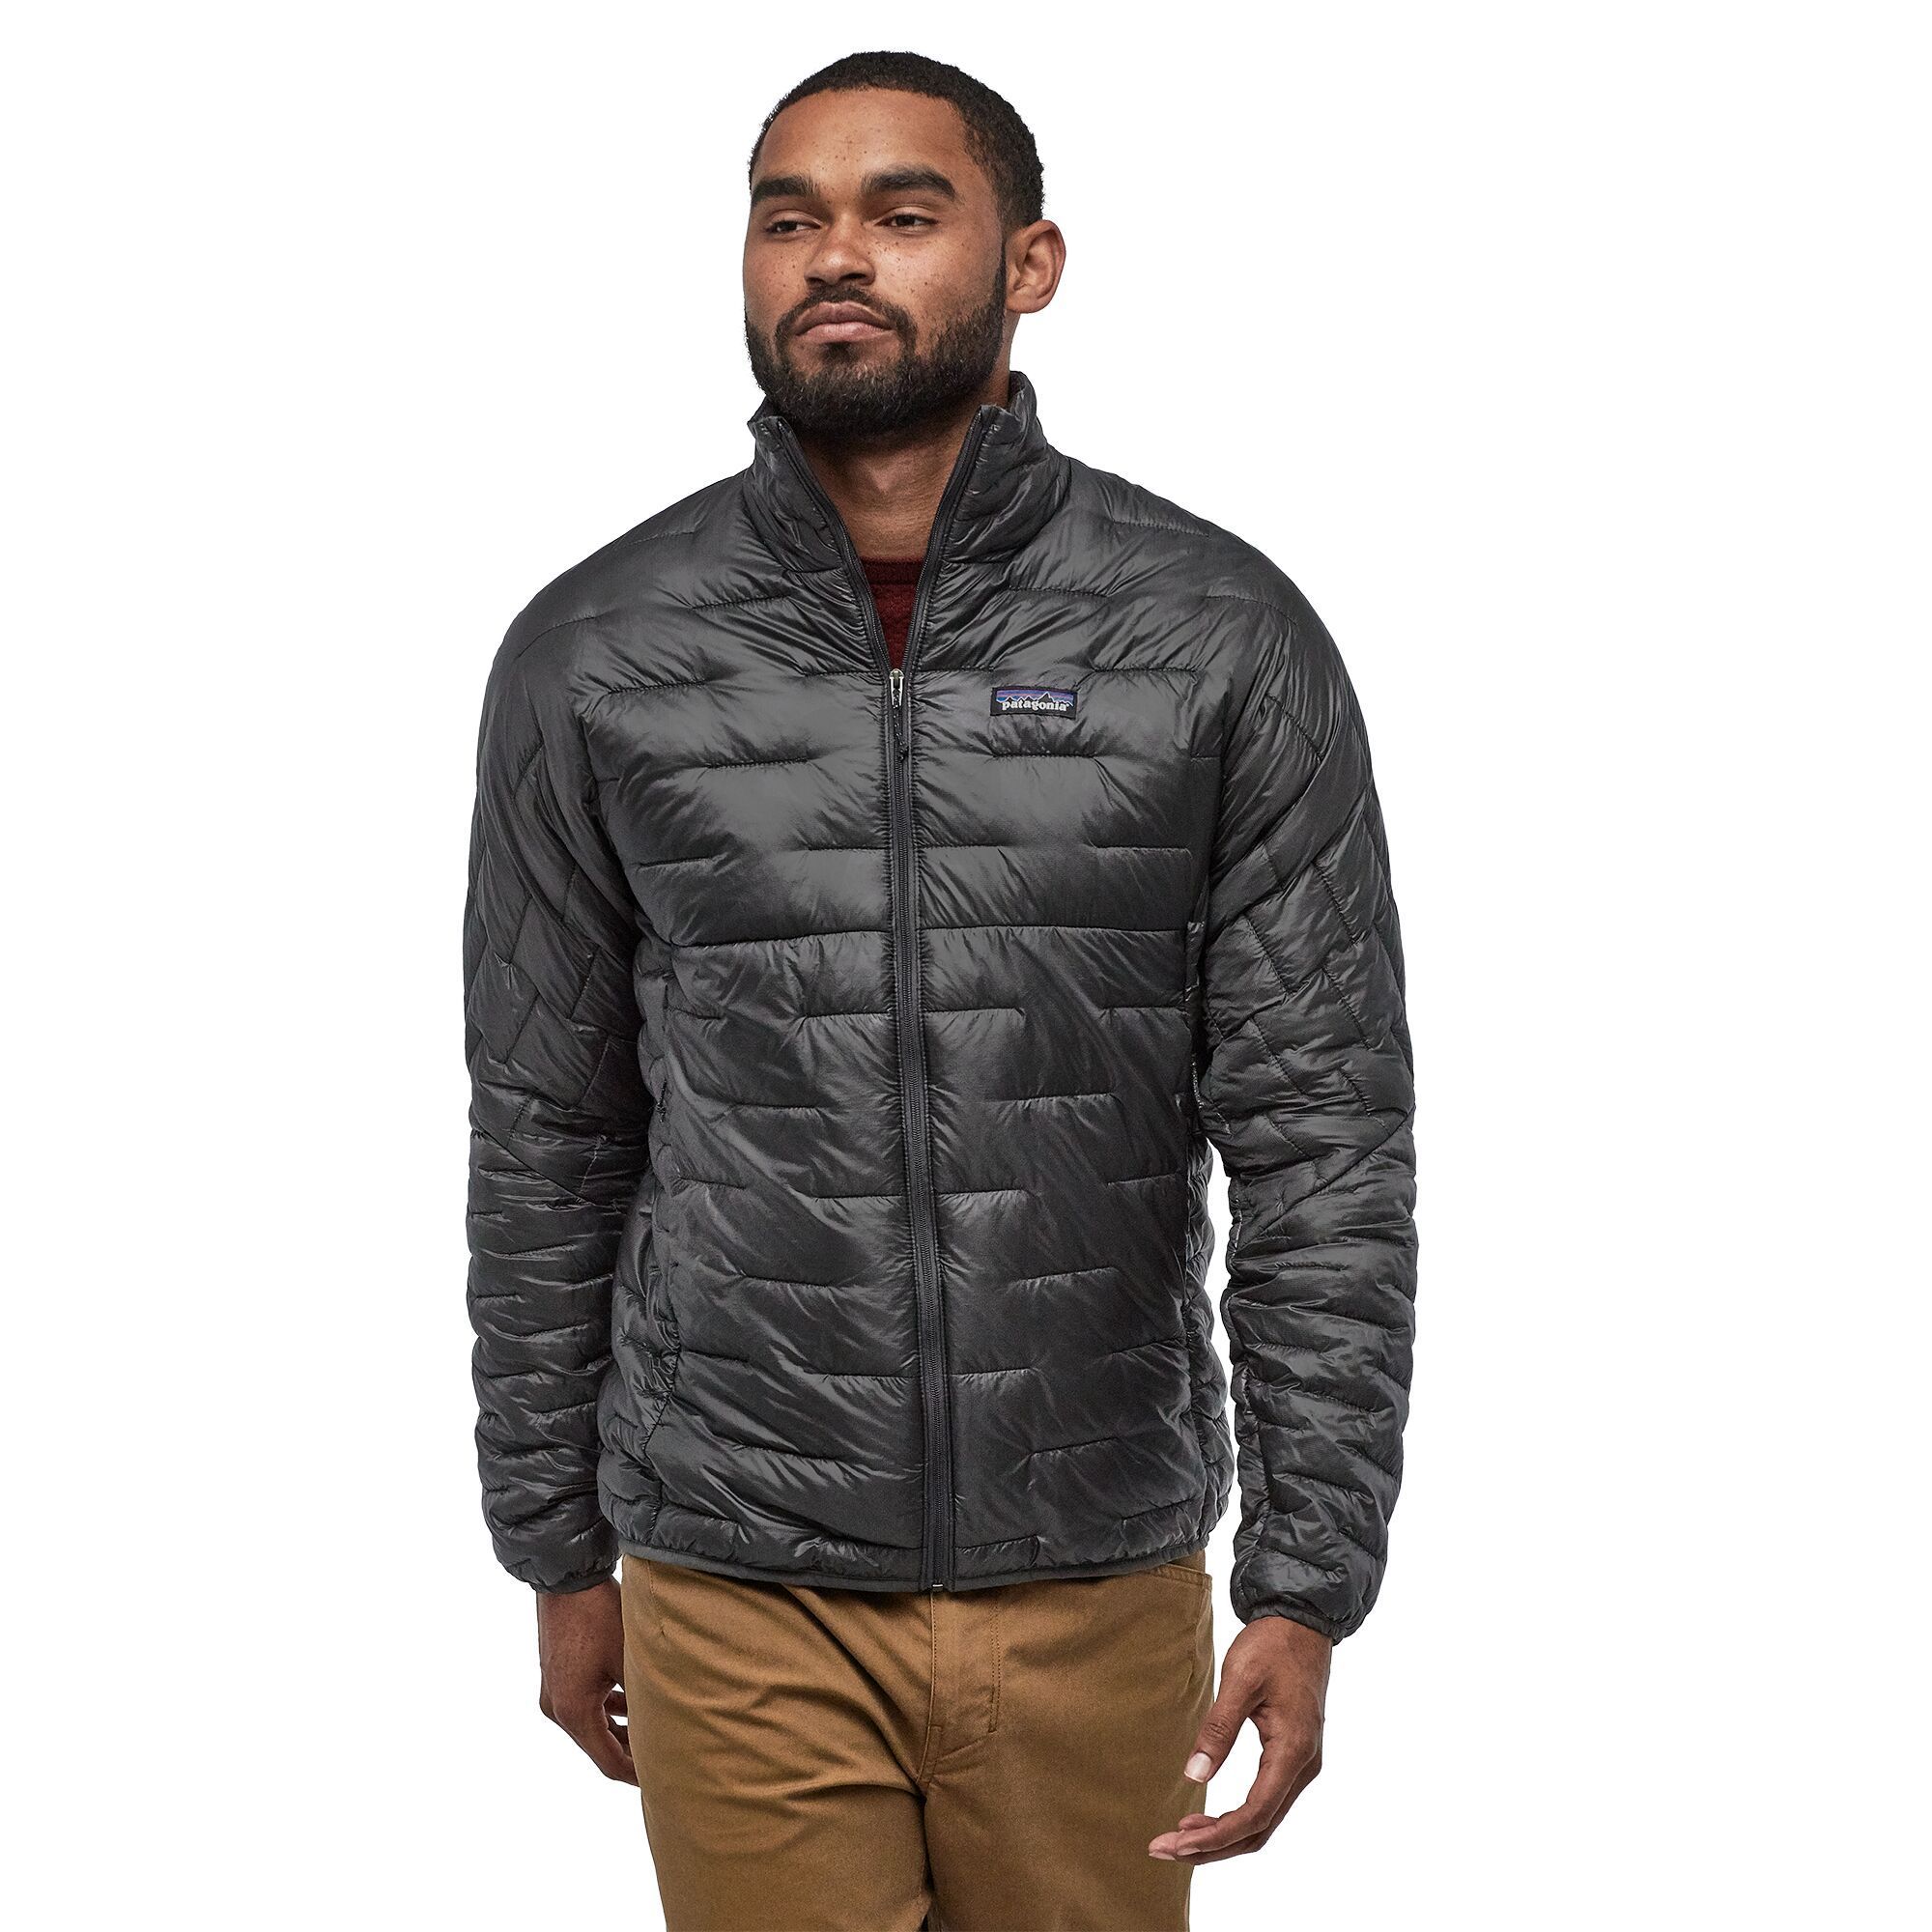 Patagonia Men's Micro Puff® Jacket - Fair Trade Certified sewn, Forge Grey / S